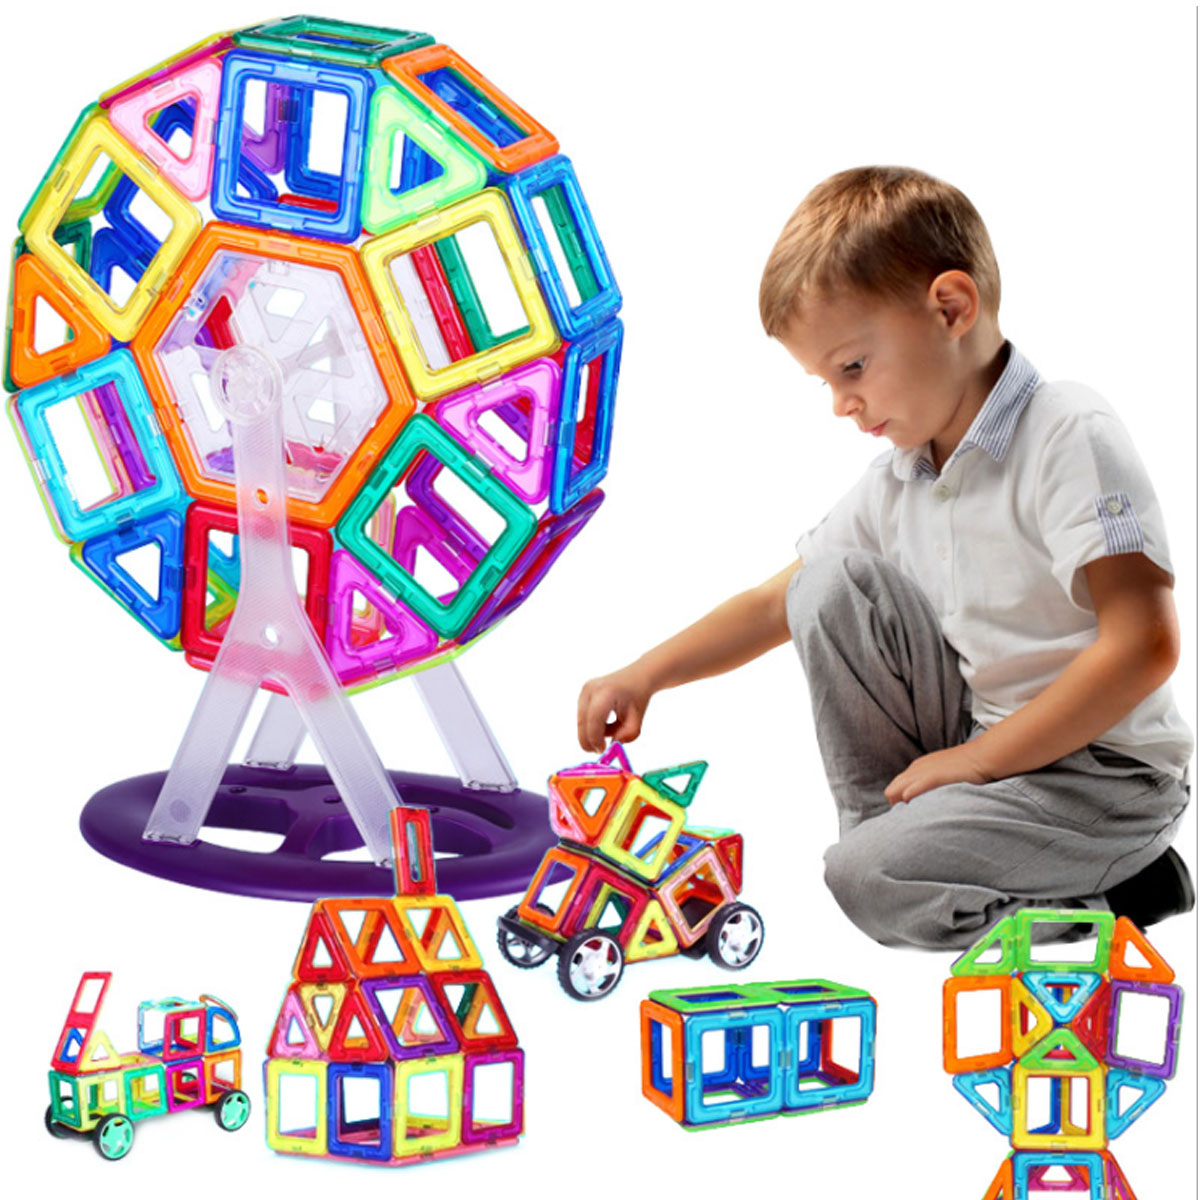 113-Pieces-Kids-Magnetic-Toys-Magnet-Tiles-Kits-Blocks-Building-Toys-For-Boys-Girls-1384002